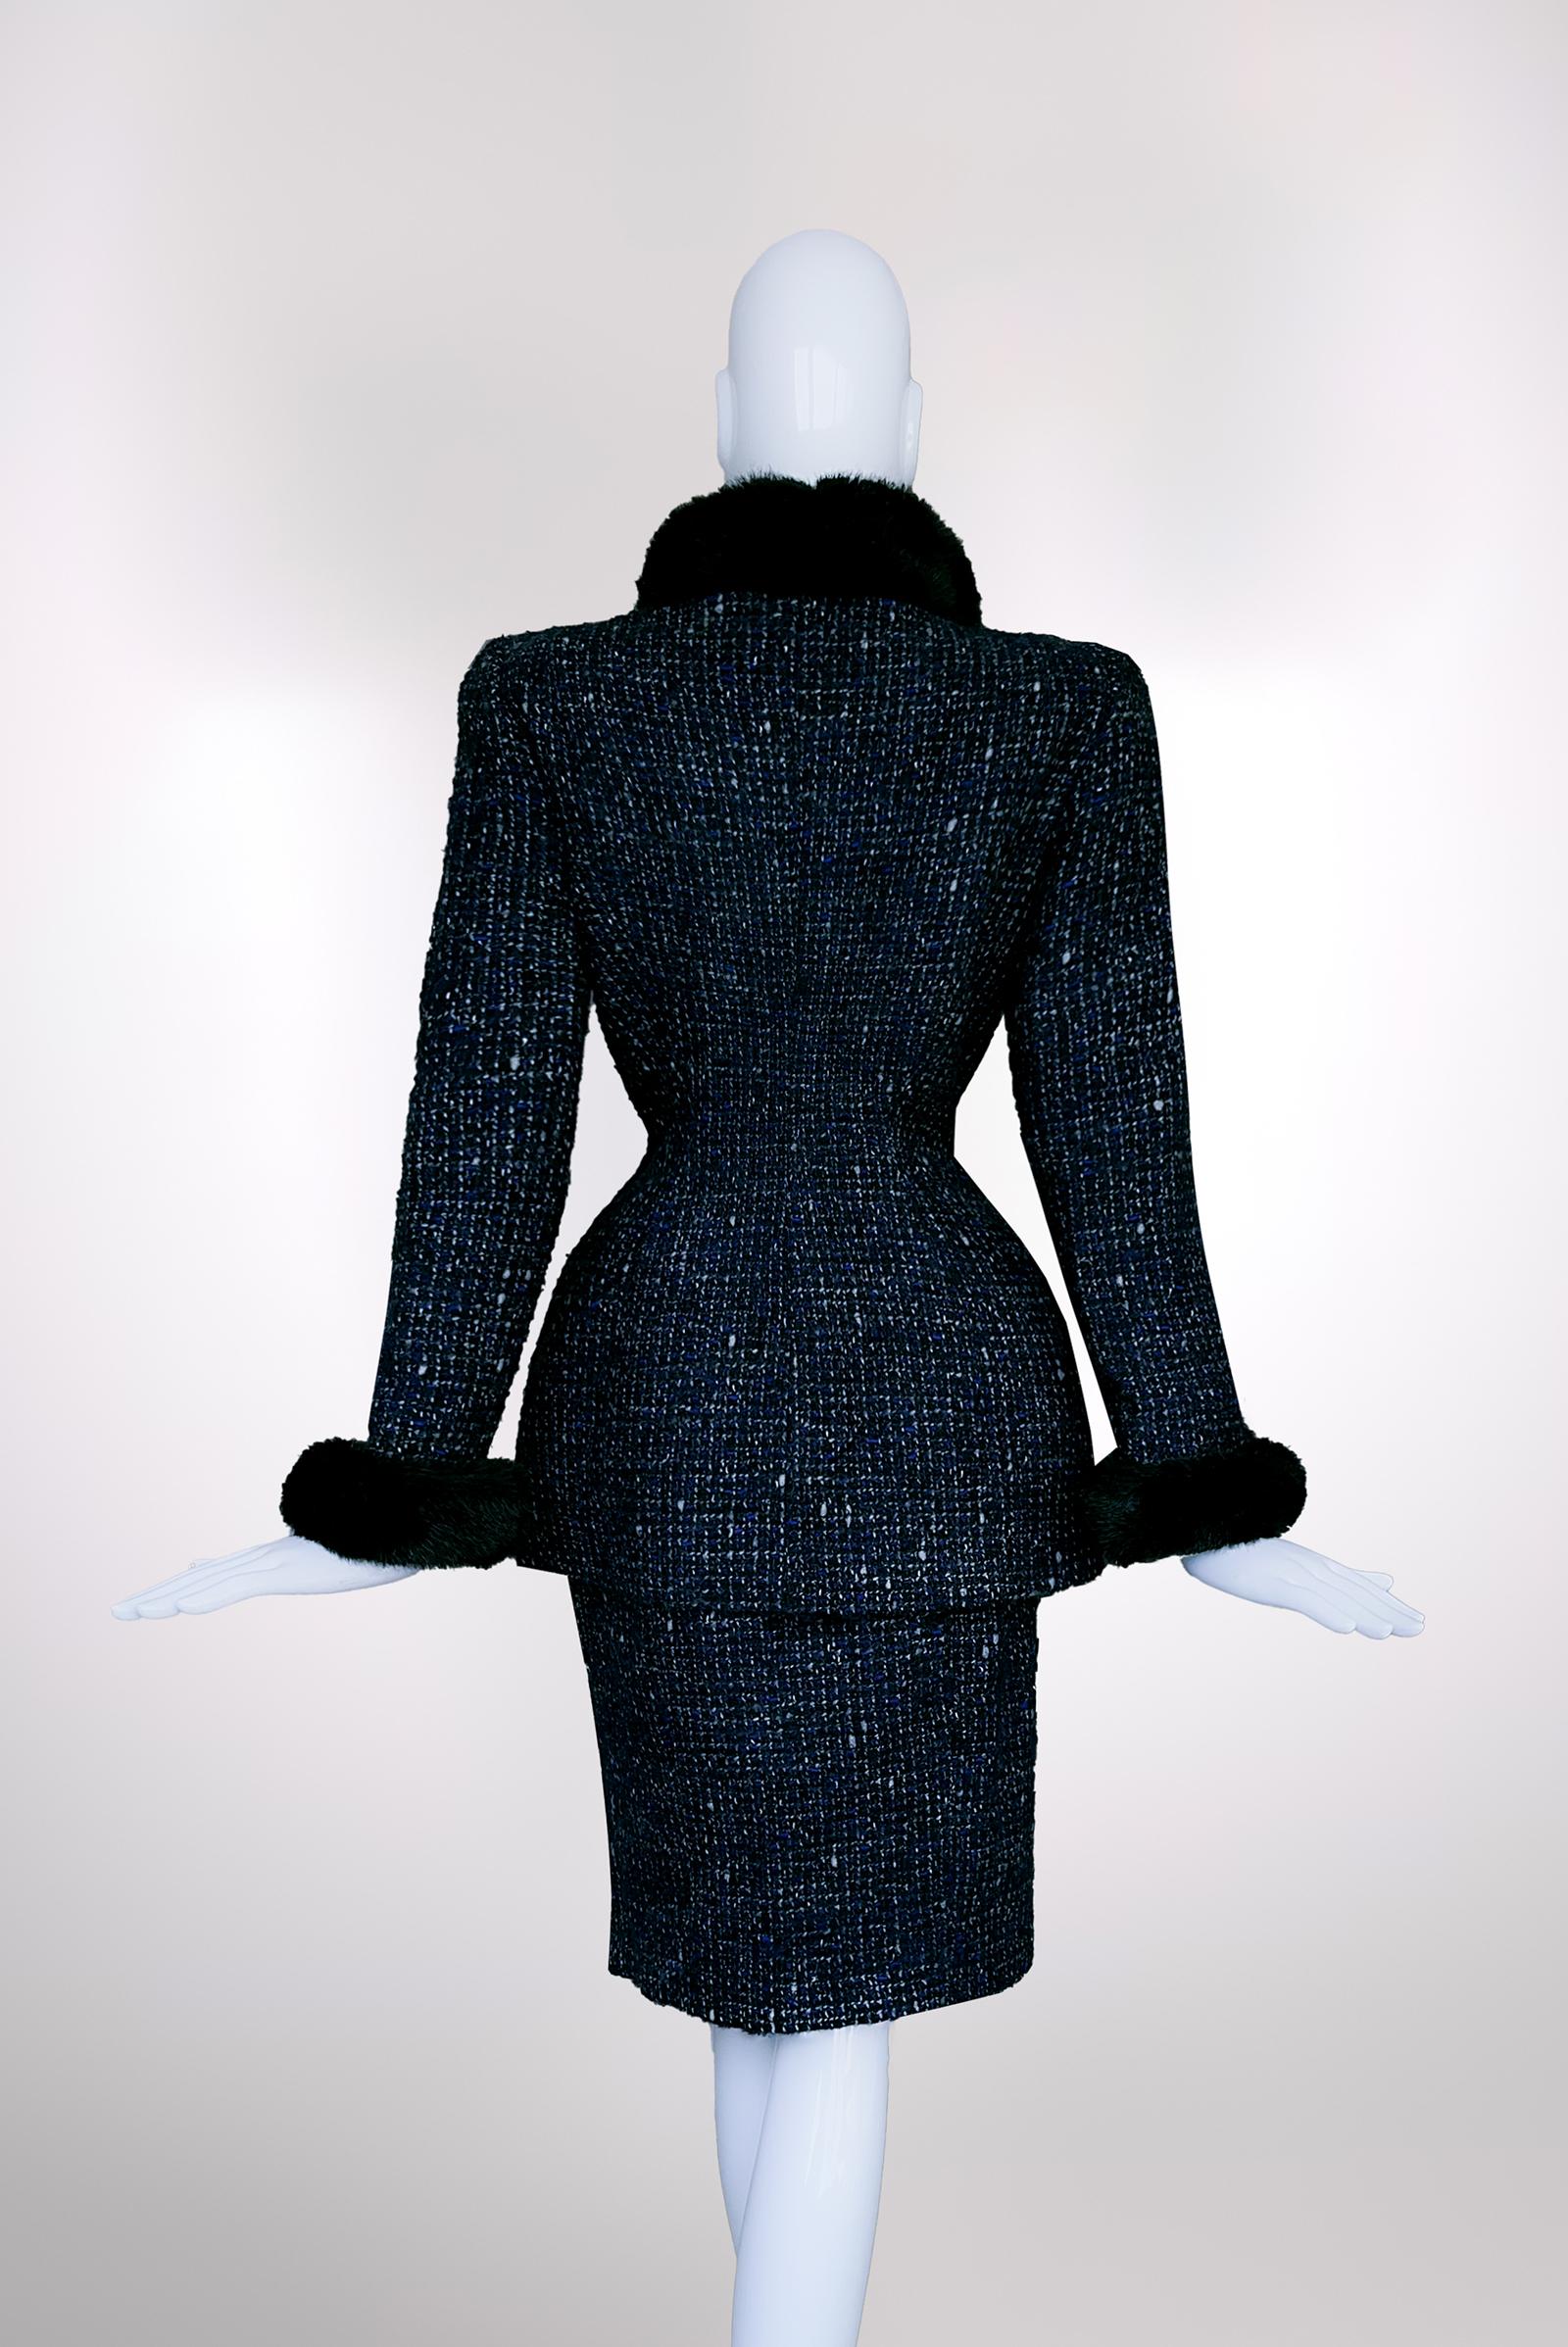 Rare Thierry Mugler FW1998 Archival Skirt Suit Tweed Jacket  In Good Condition For Sale In Berlin, BE